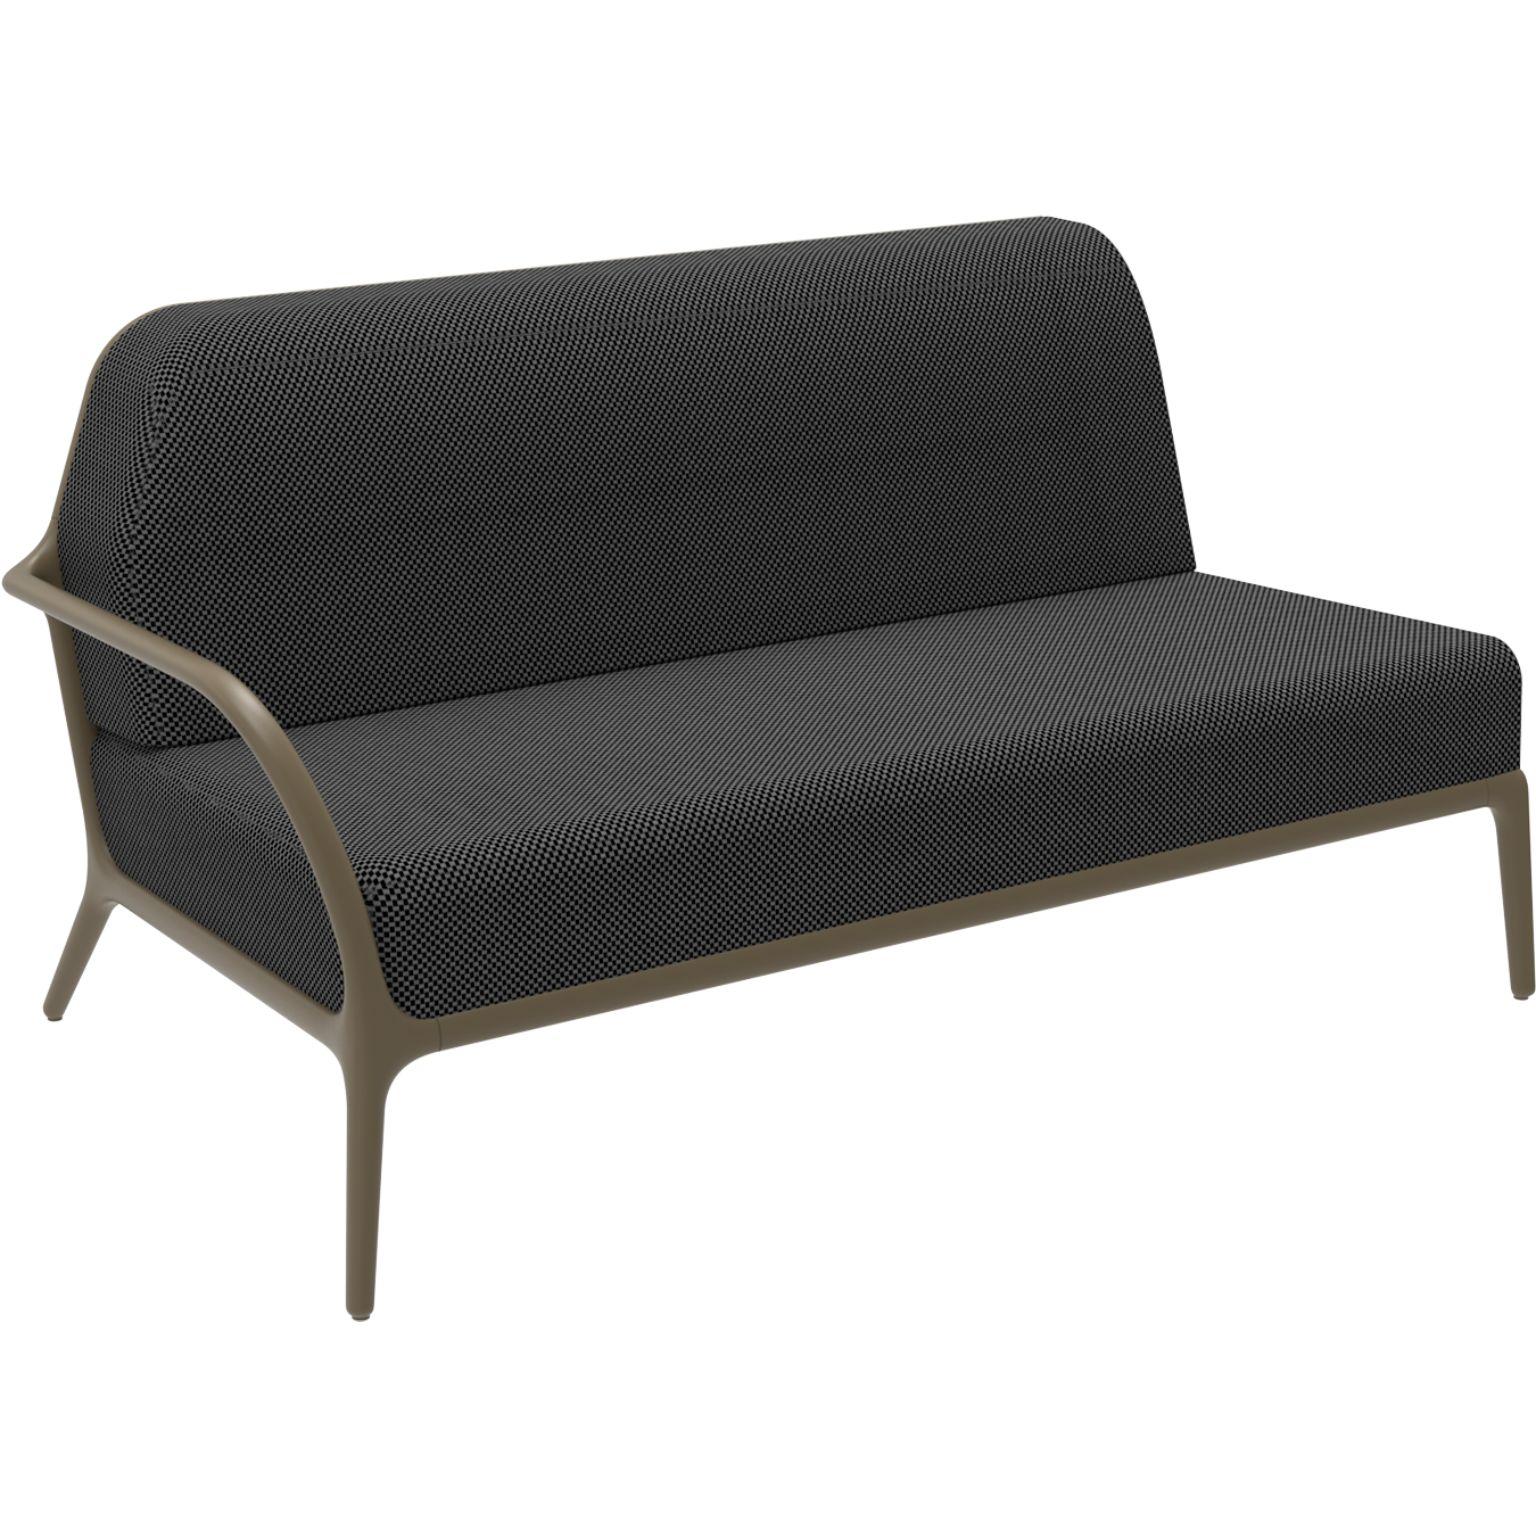 Xaloc right 160 bronze modular sofa by Mowee
Dimensions: D 100 x W 160 x H 81 cm (Seat Height 42 cm)
Material: Aluminium, Textile
Weight: 37 kg
Also available in different colours and finishes.

 Xaloc synthesizes the lines of interior